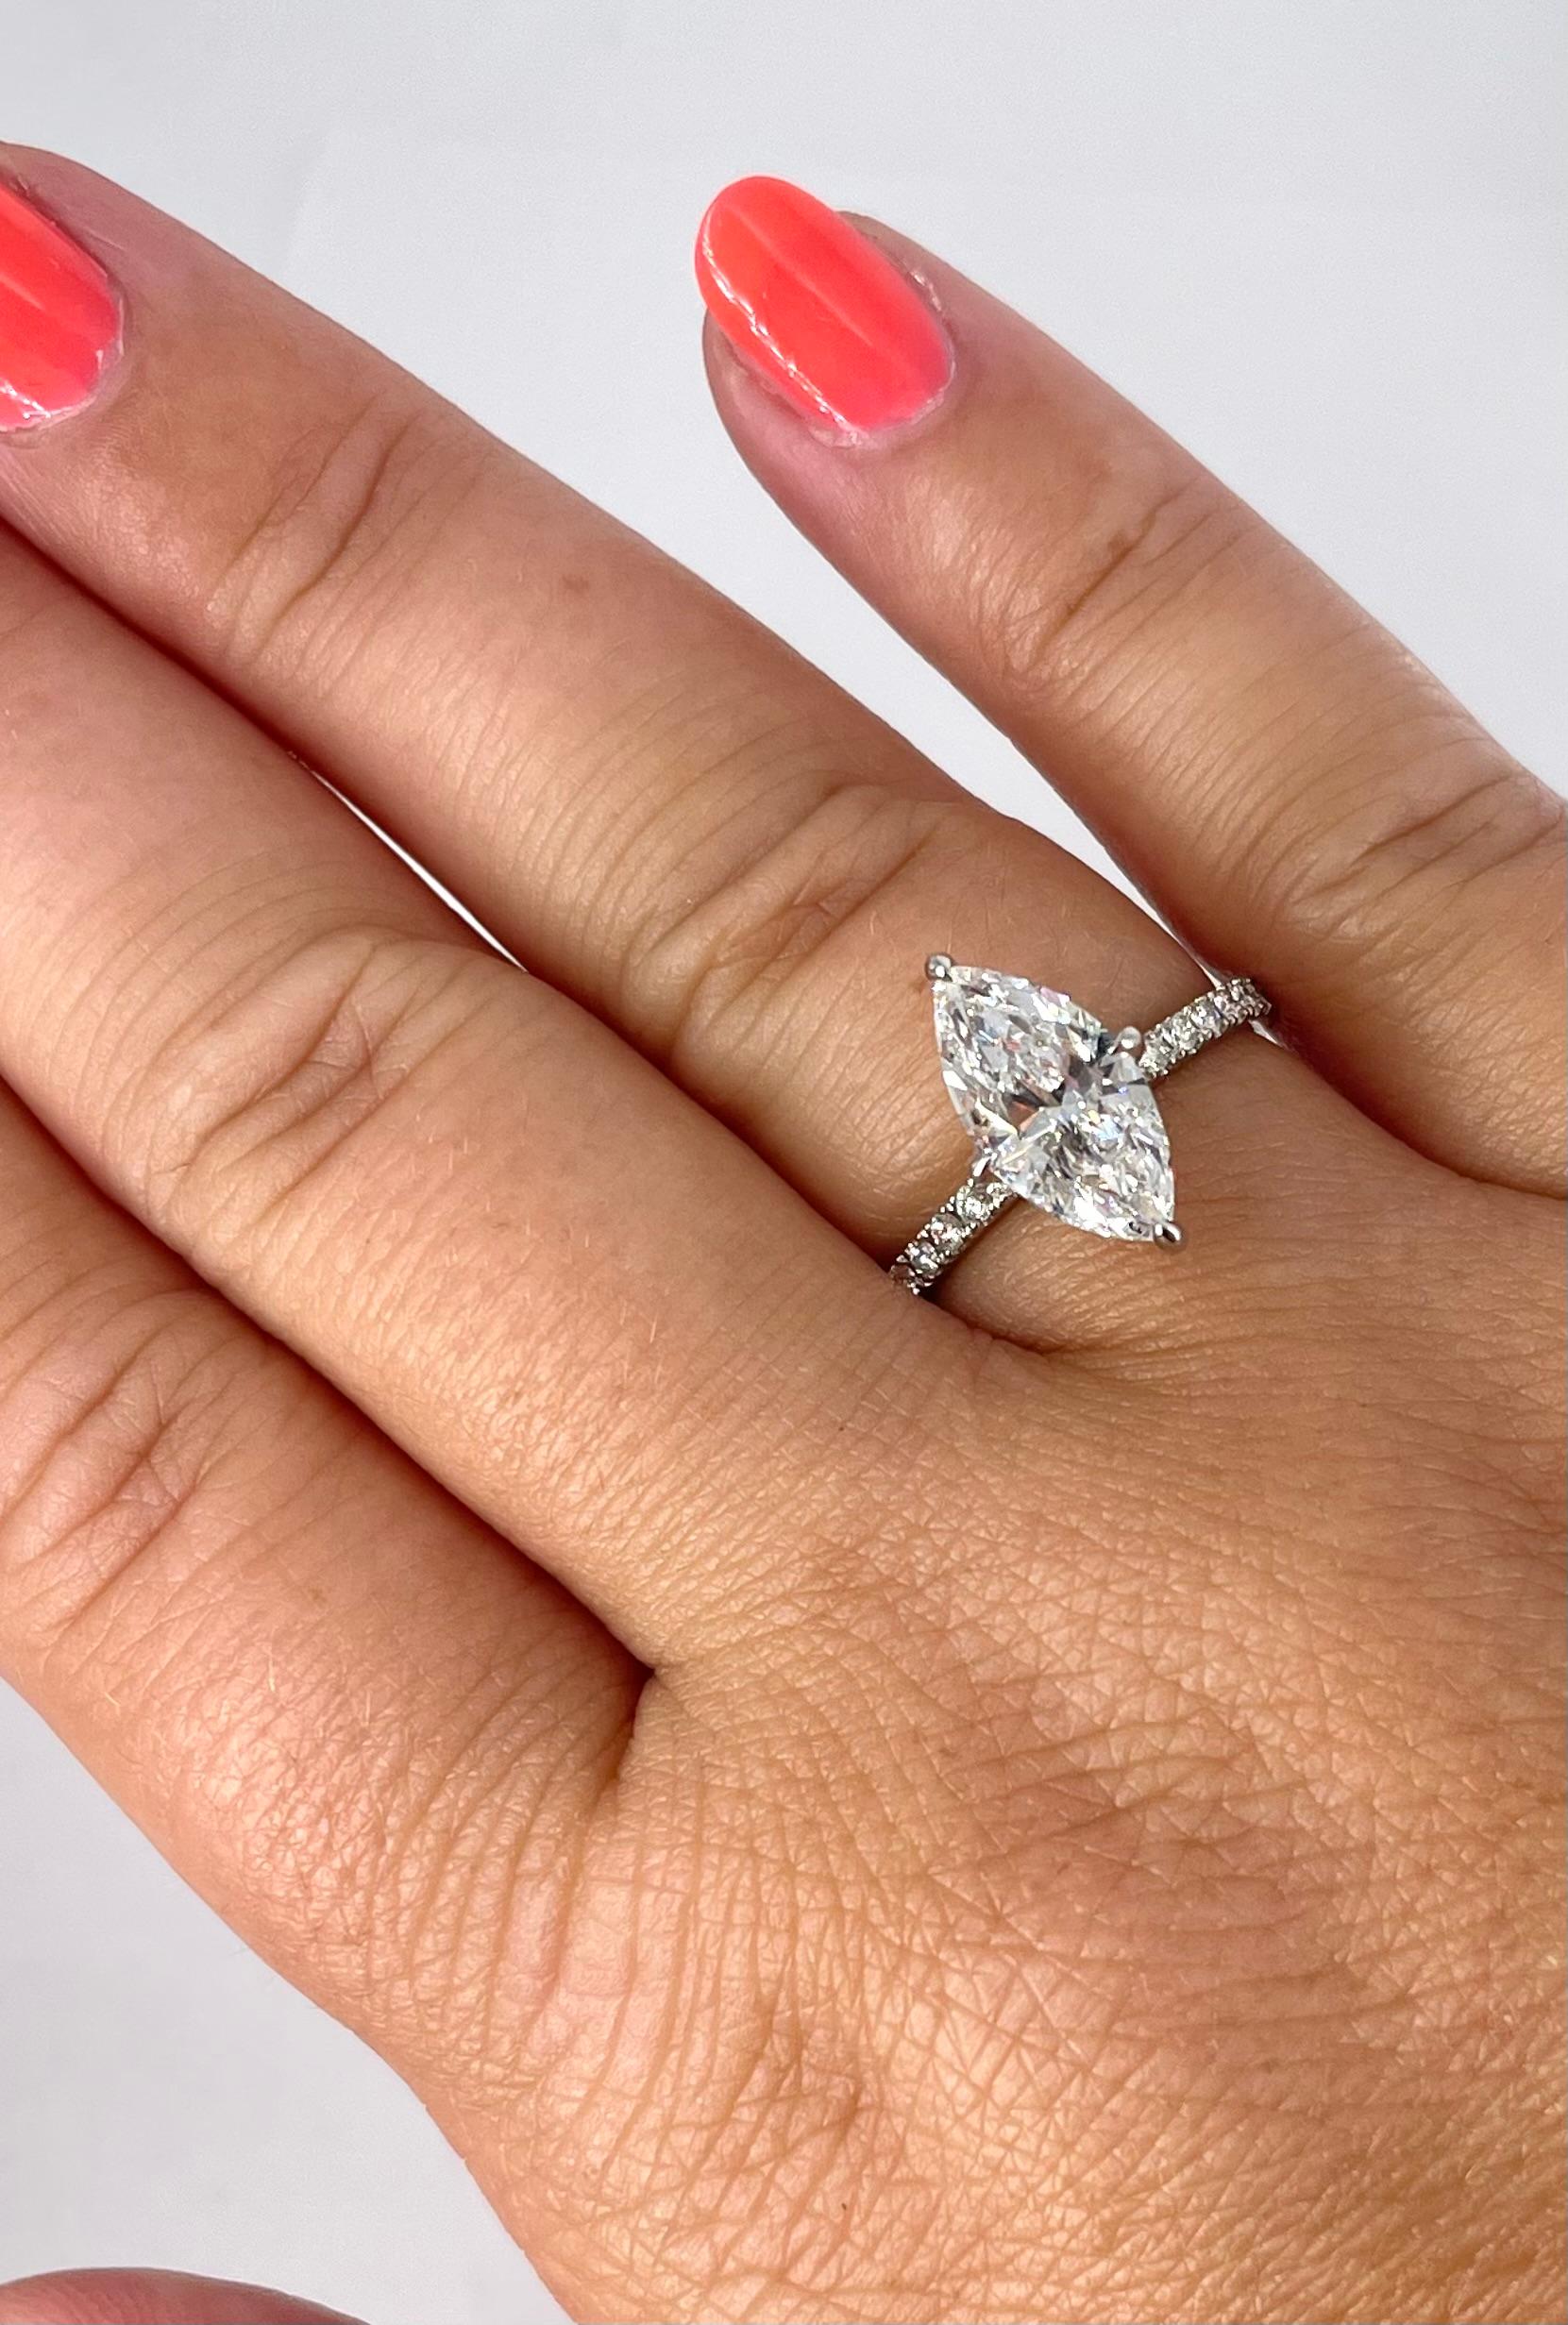 J. Birnbach 1.65 carat GIA DIF Marquise Pave Engagement Ring in Platinum In New Condition For Sale In New York, NY